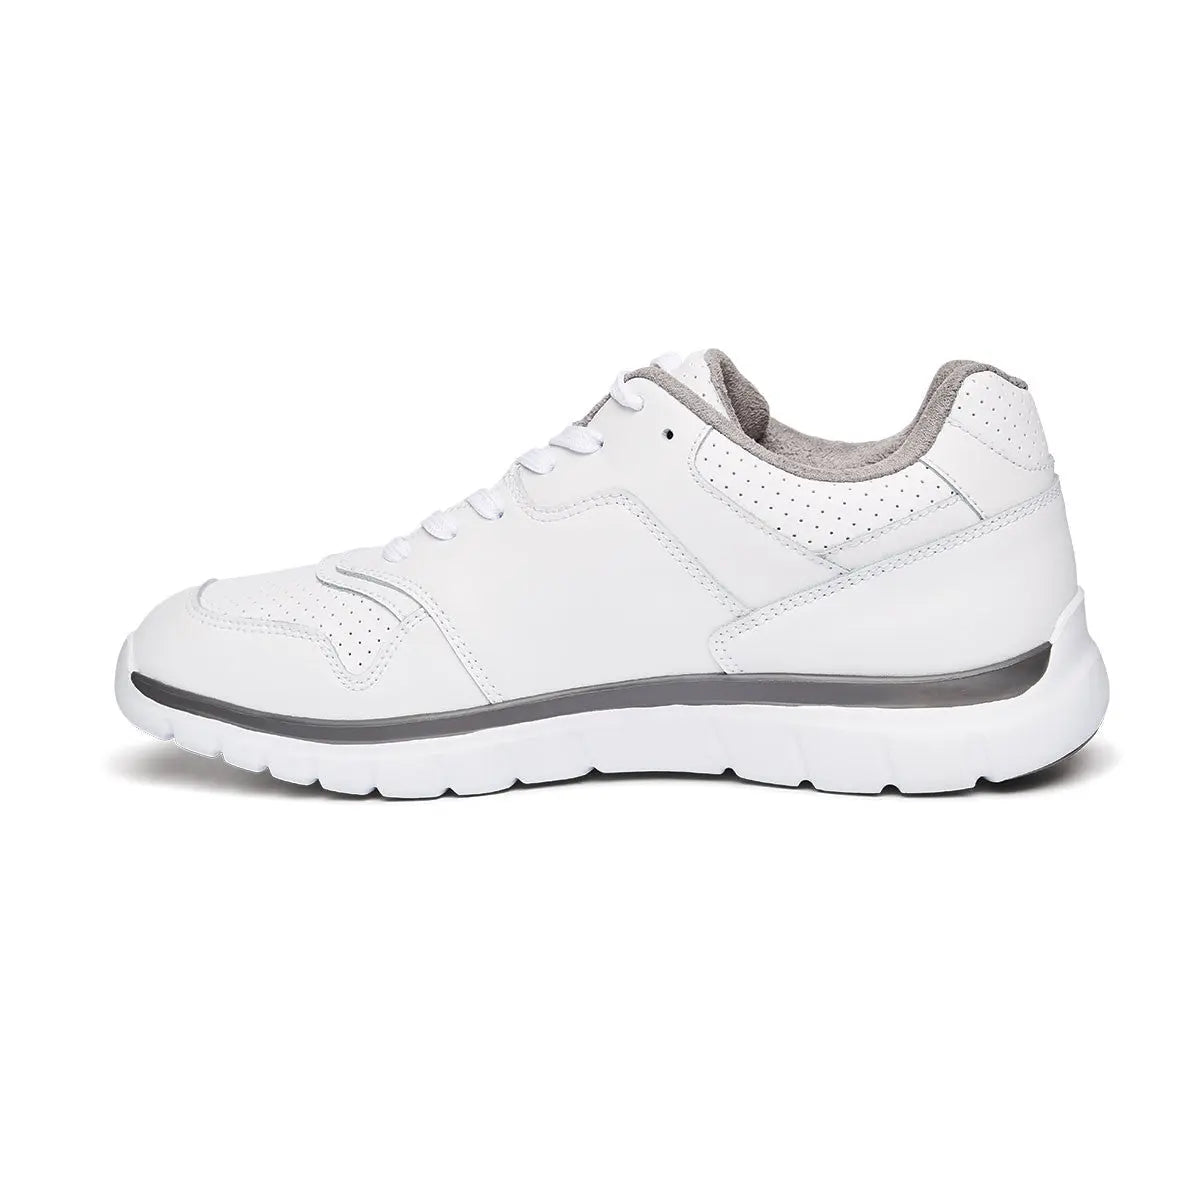 Anodyne Men's No.50 Sport Trainer - White available in three widths: medium, wide and extra wide